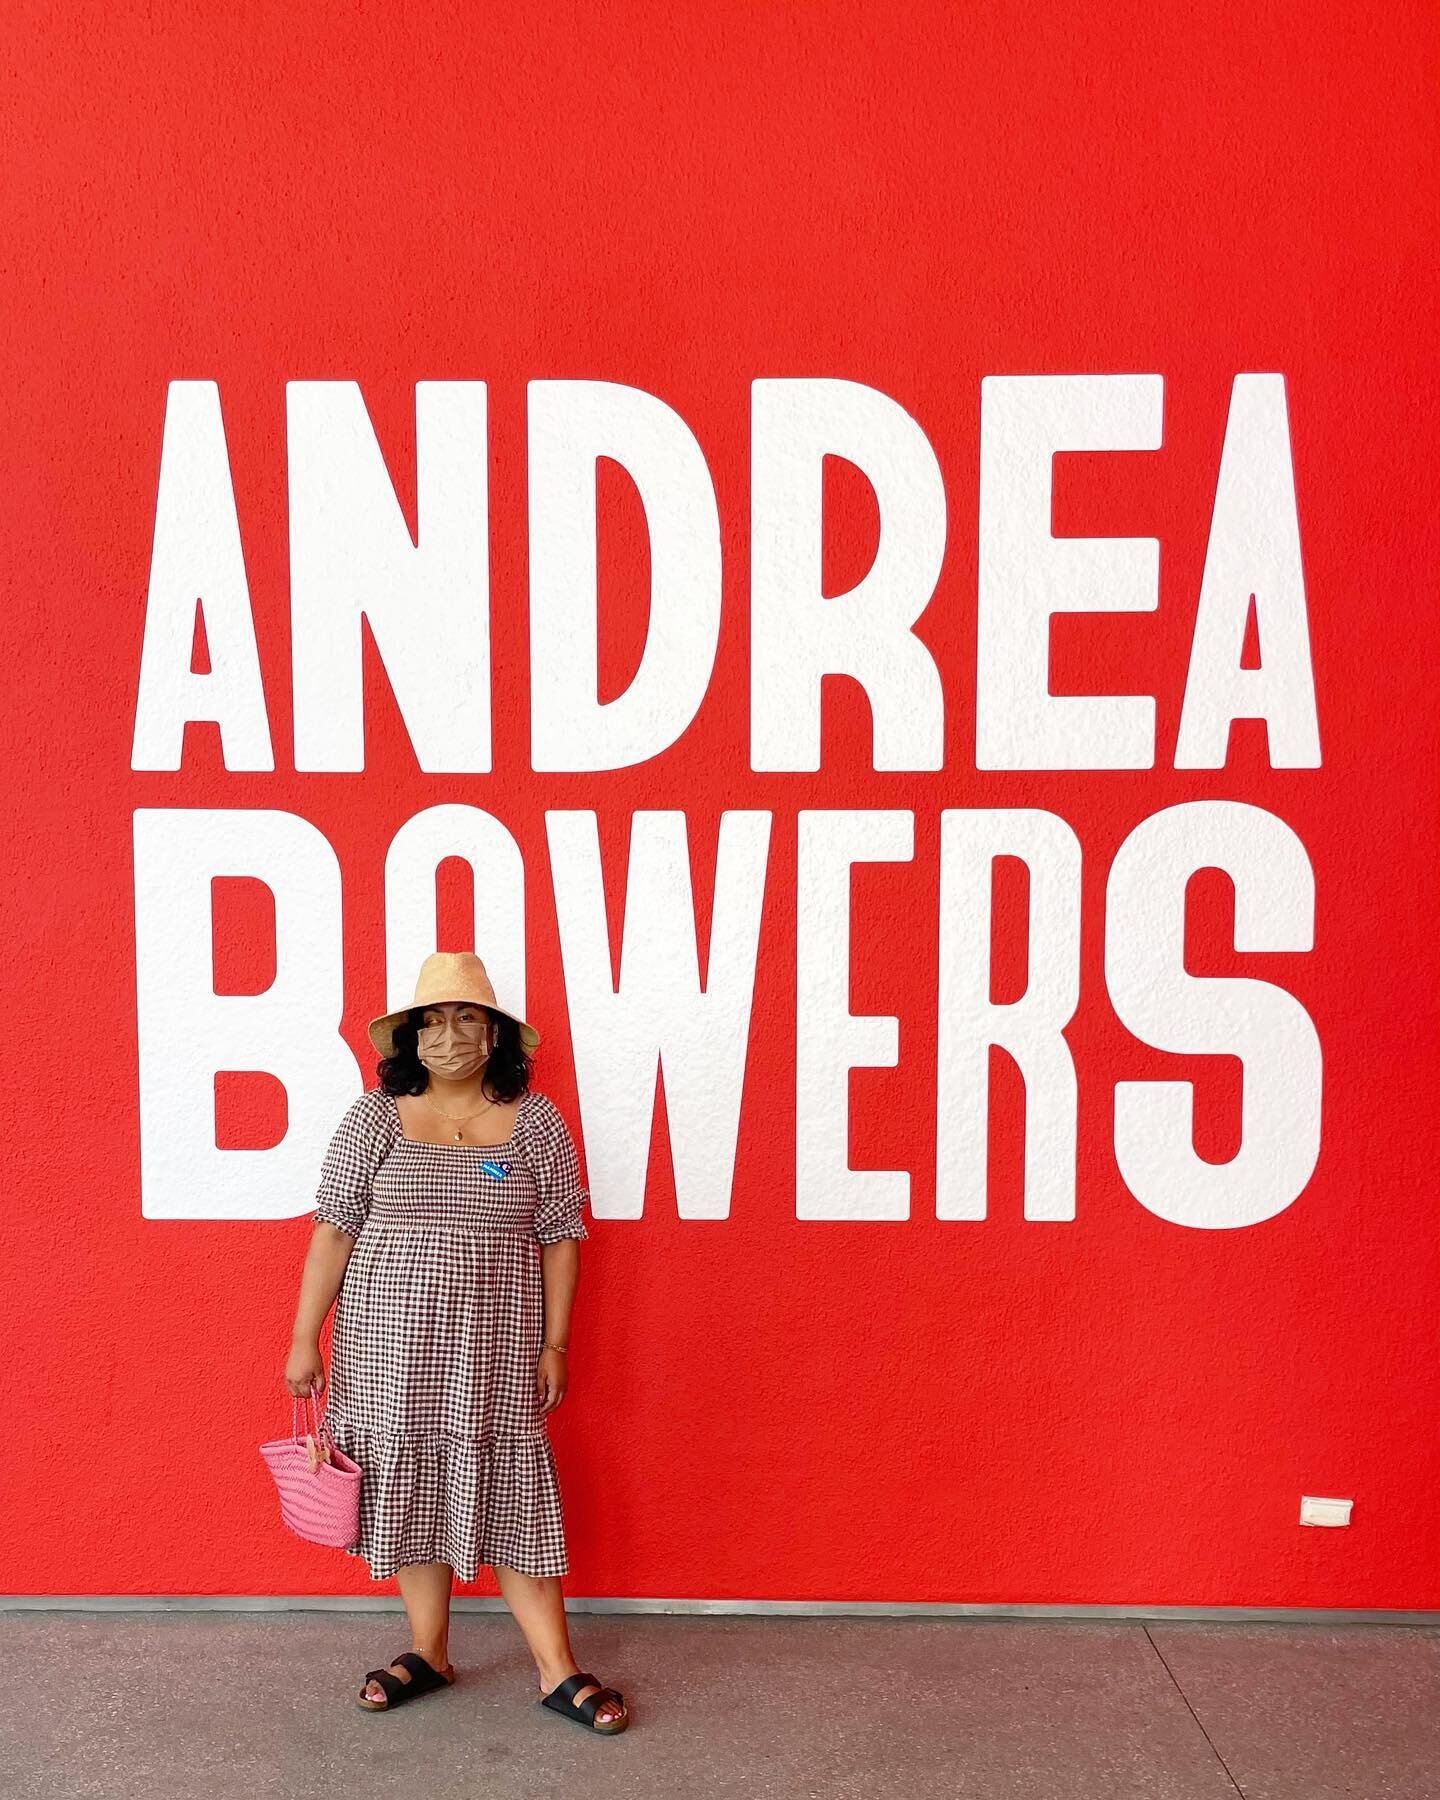 Some of our favs from #AndreaBowers exhibition at @hammer_museum 

🖌#gurlmuseumday